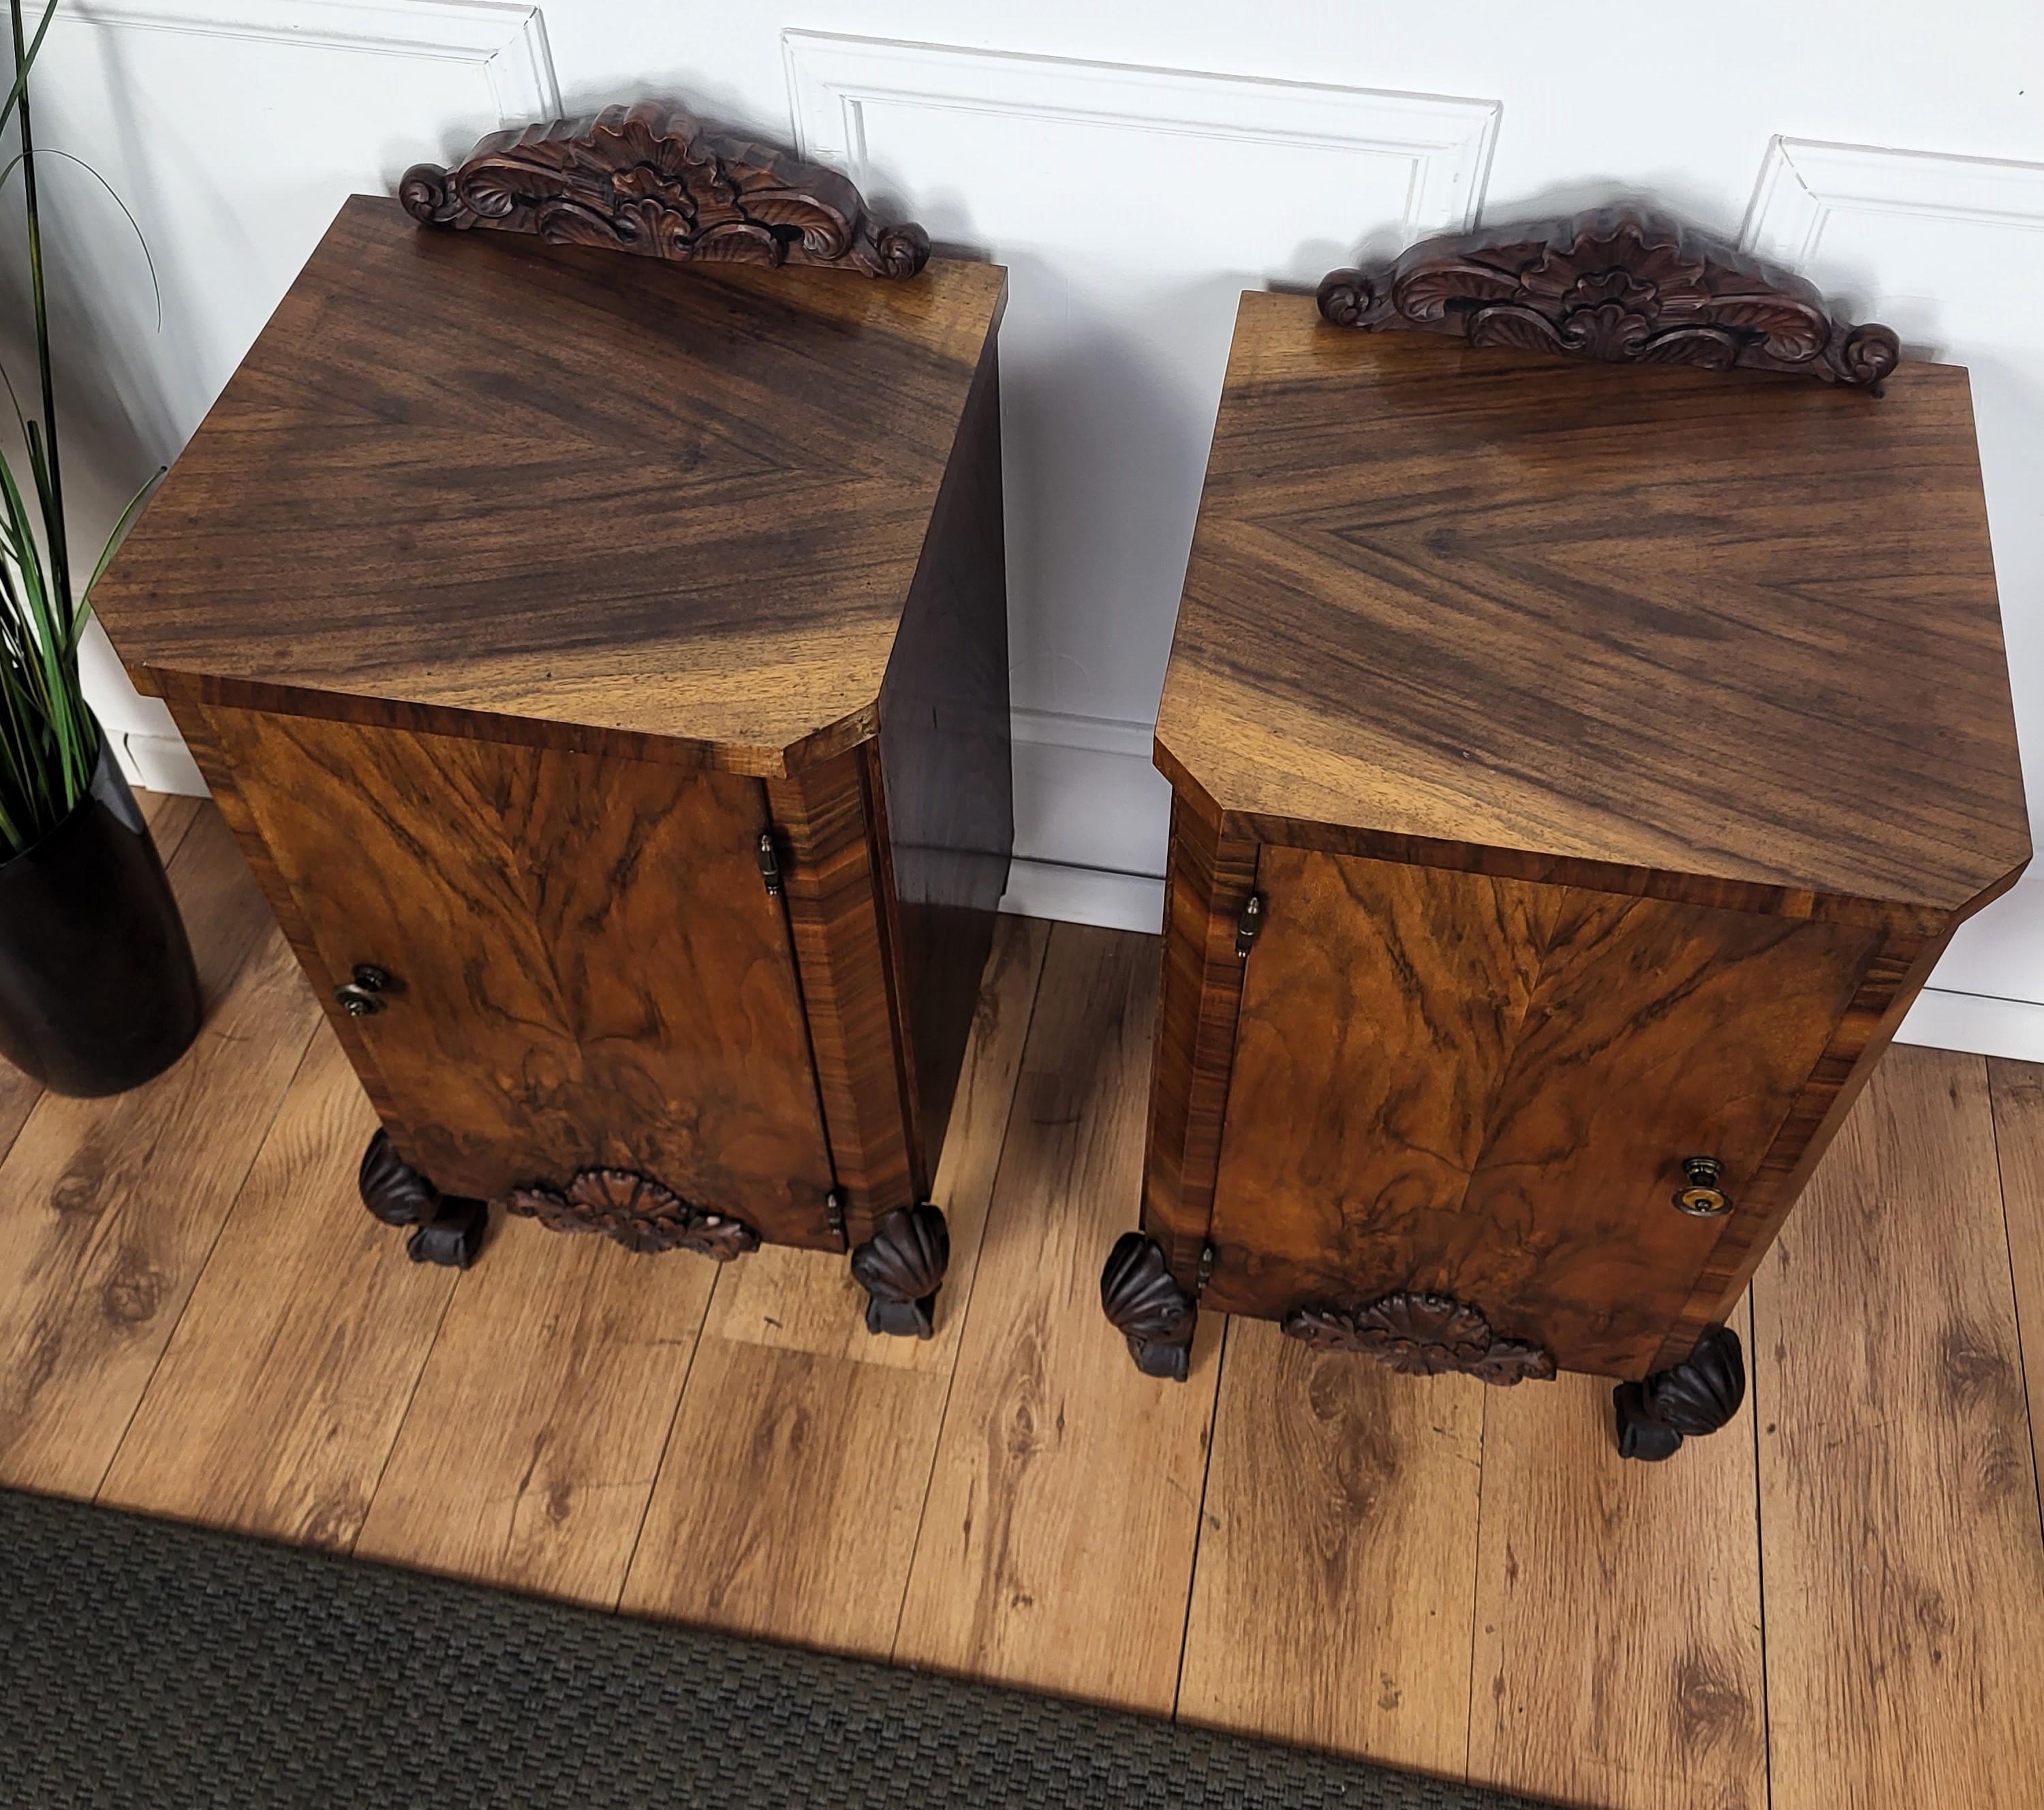 Pair of Italian Art Deco Night Stands Bed Side Tables in Burl Walnut For Sale 2